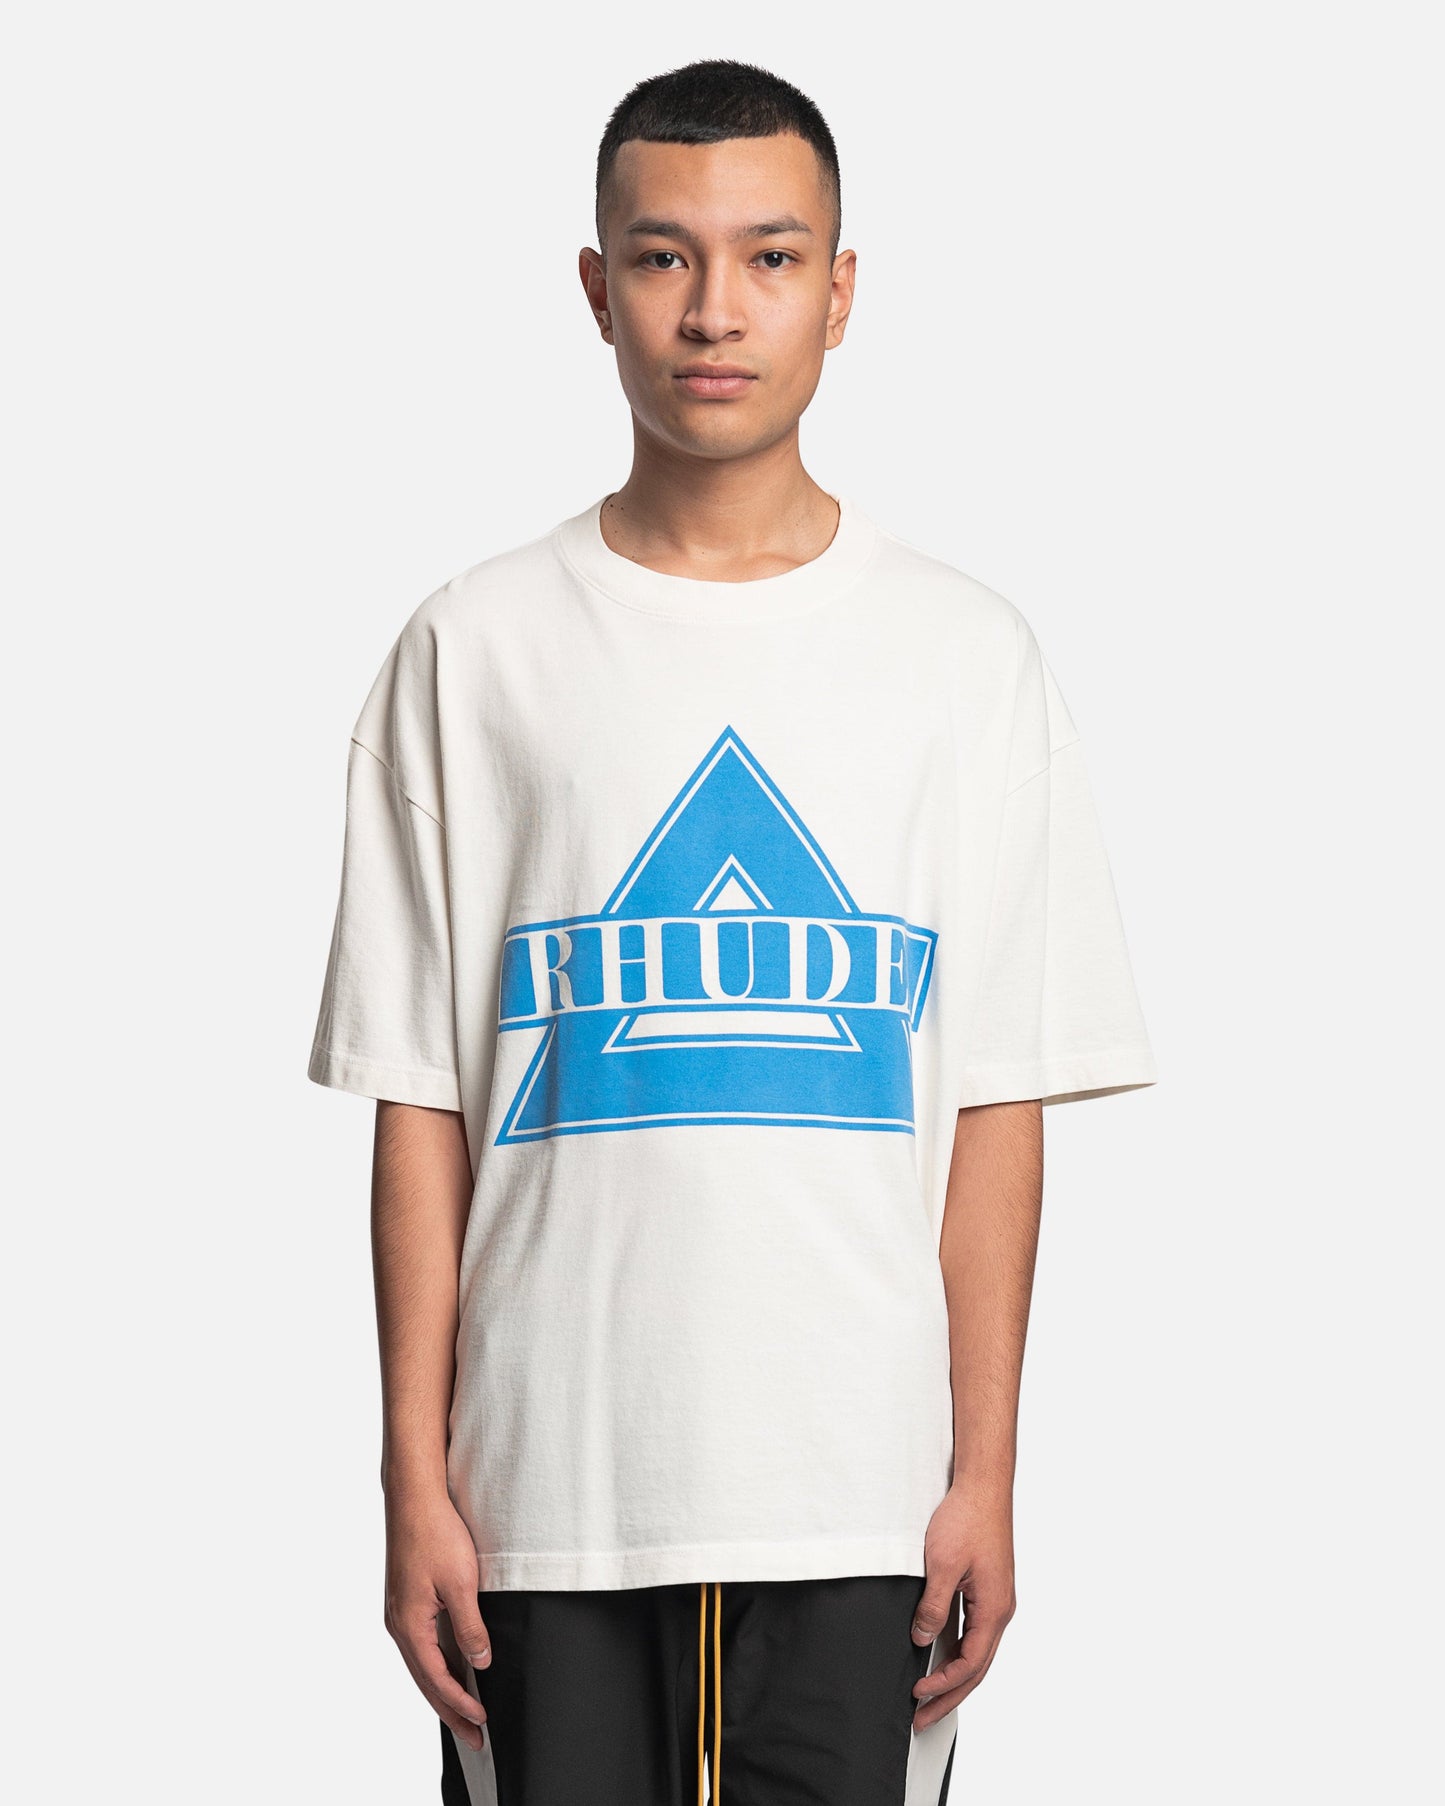 Rhude Men's T-Shirts Rhude Triangle T-Shirt in Vintage White